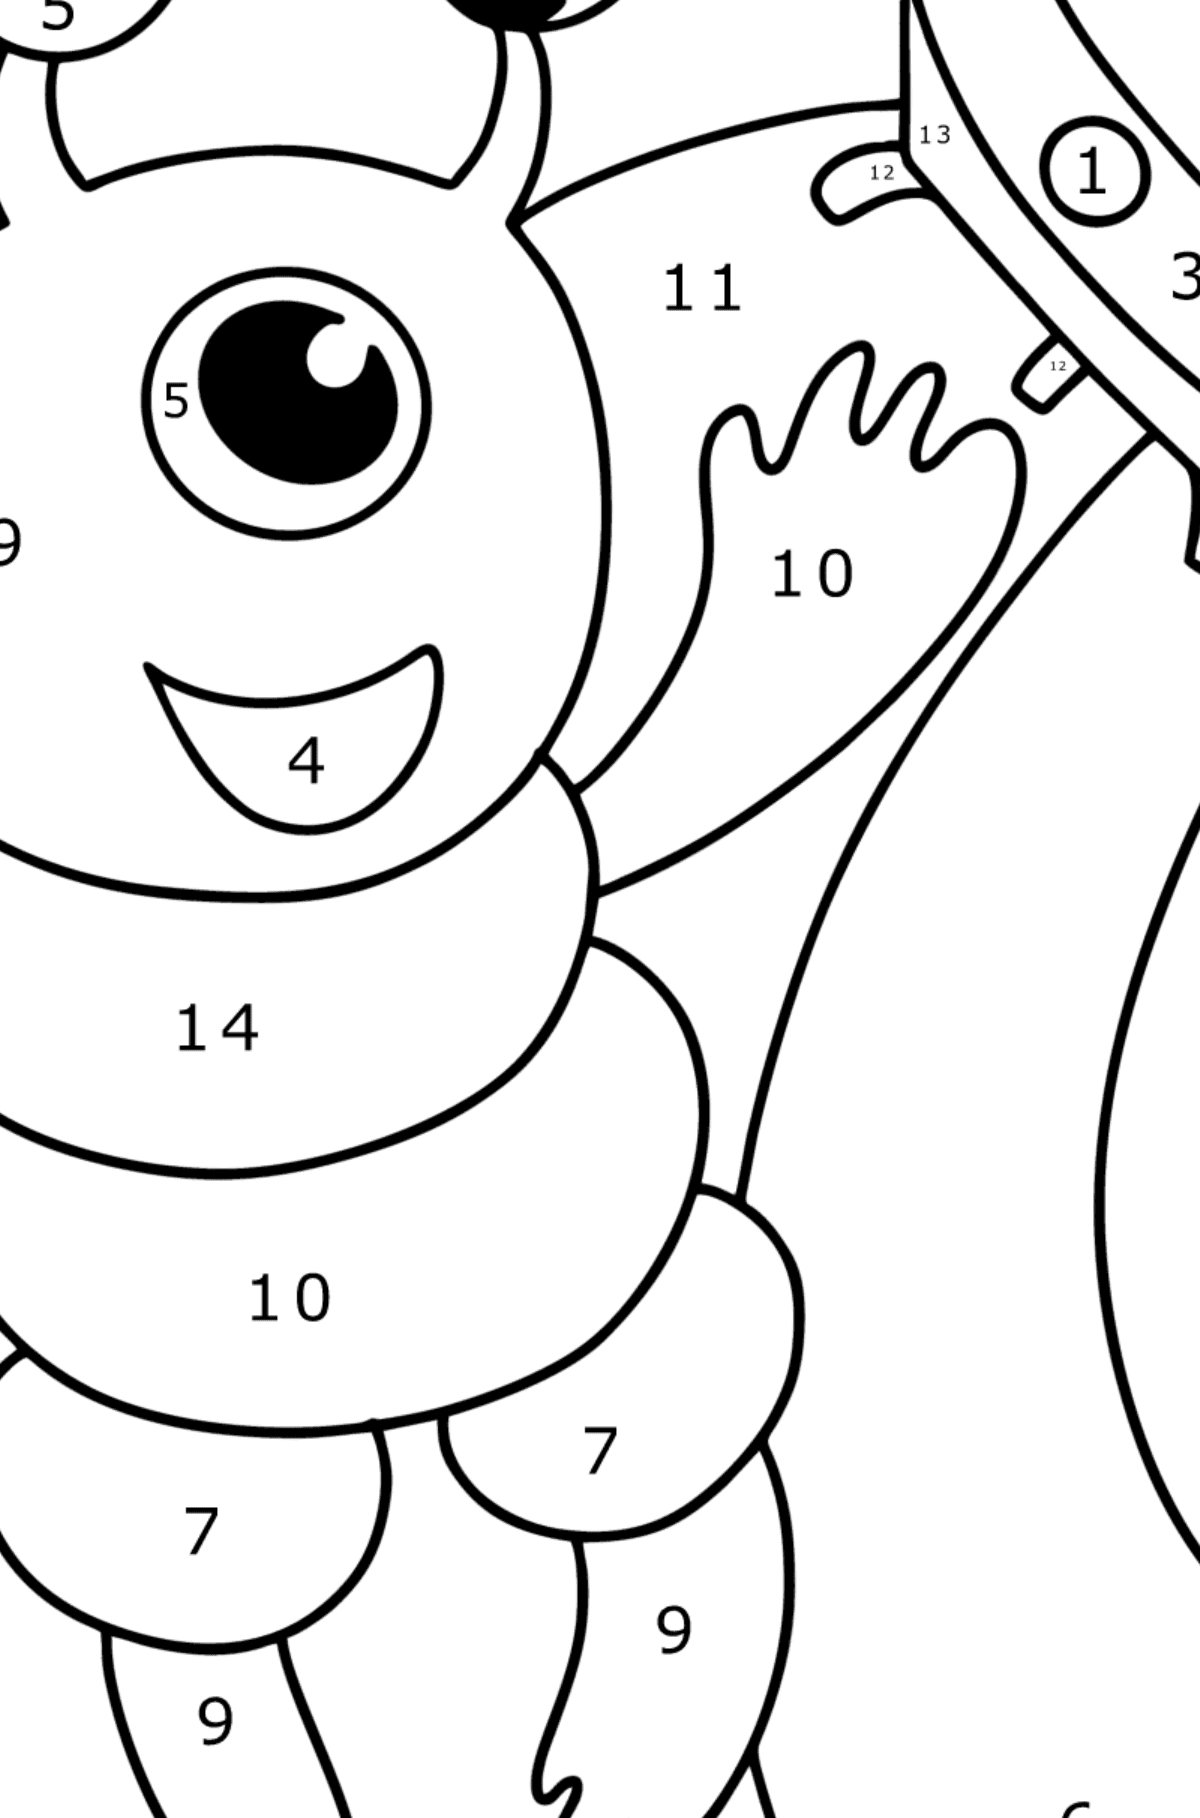 Alien in space coloring page - Coloring by Numbers for Kids